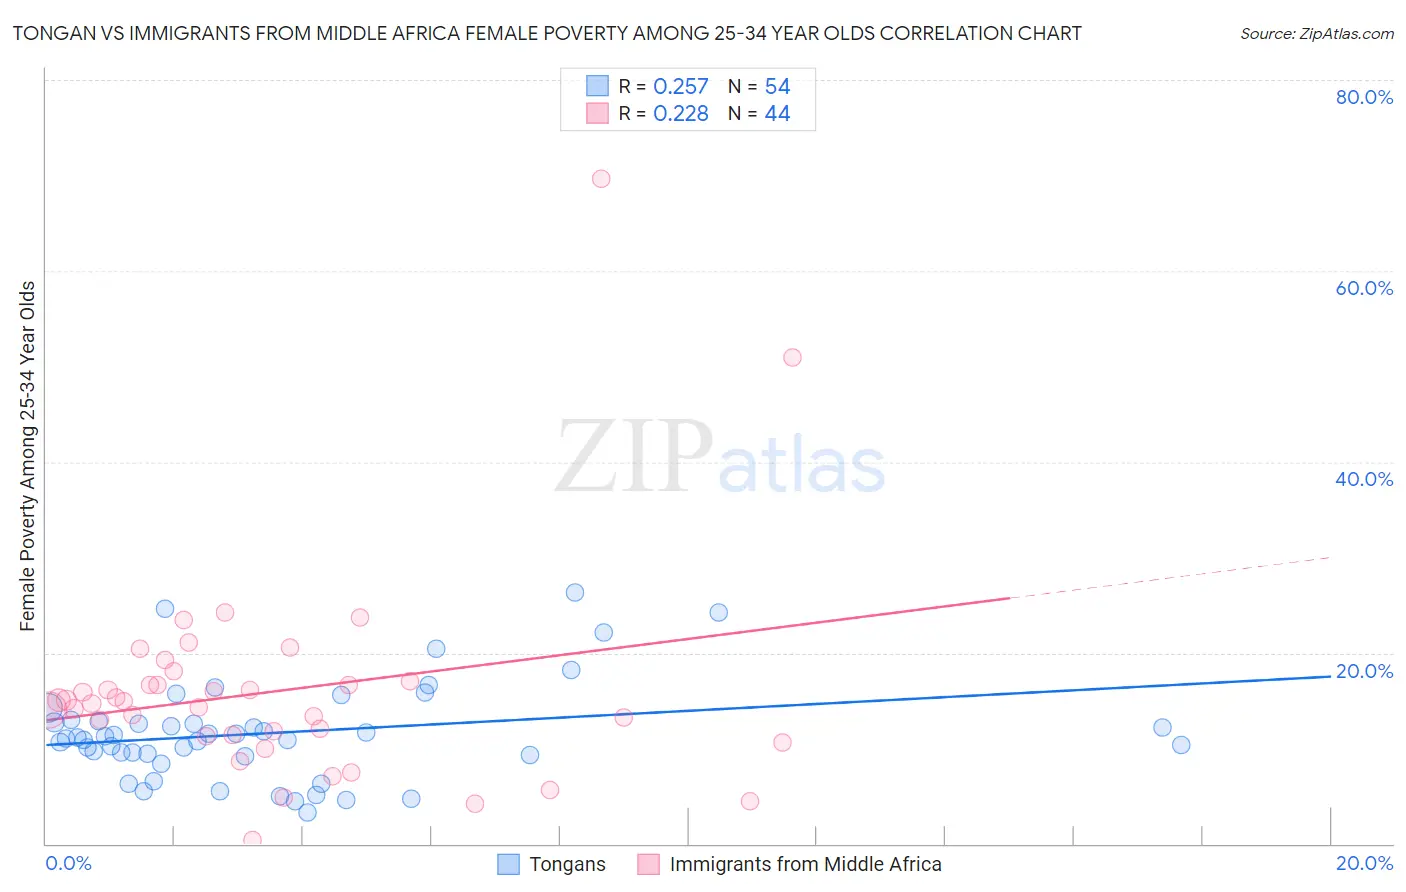 Tongan vs Immigrants from Middle Africa Female Poverty Among 25-34 Year Olds